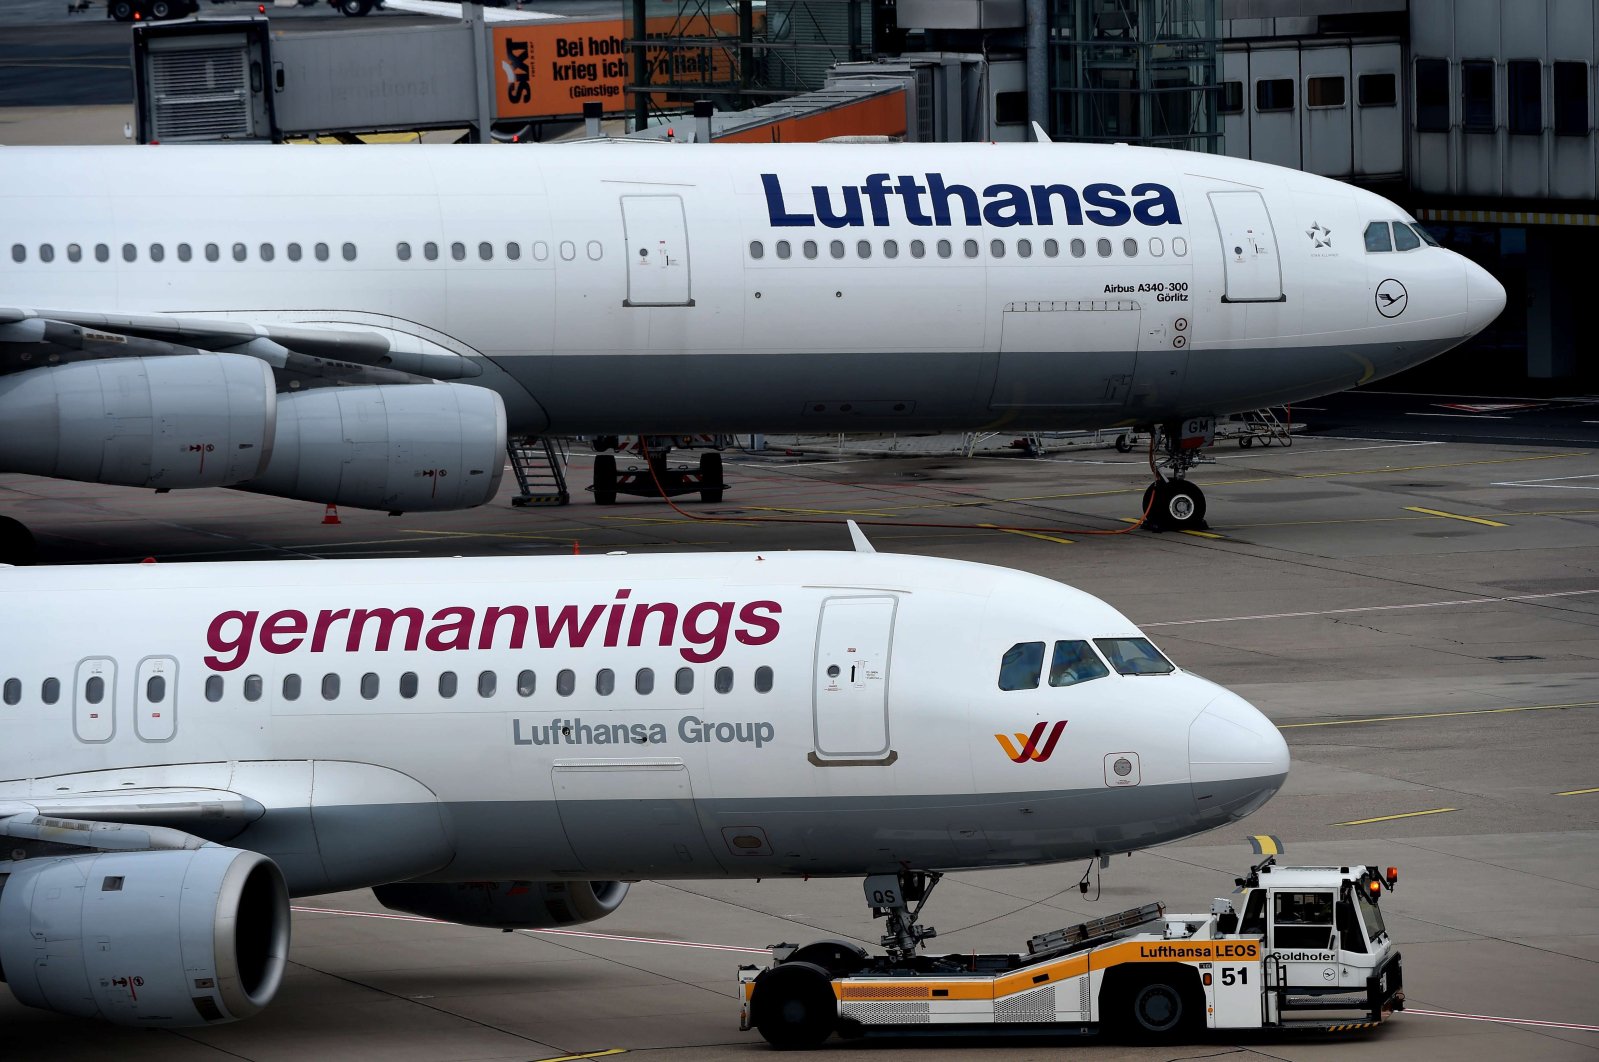 An Airbus plane of German airline Lufthansa (top) and a plane of the company's Germanwings subsidiary are pictured at the Duesseldorf airport in Duesseldorf, western Germany, March 26, 2015. (AFP Photo)